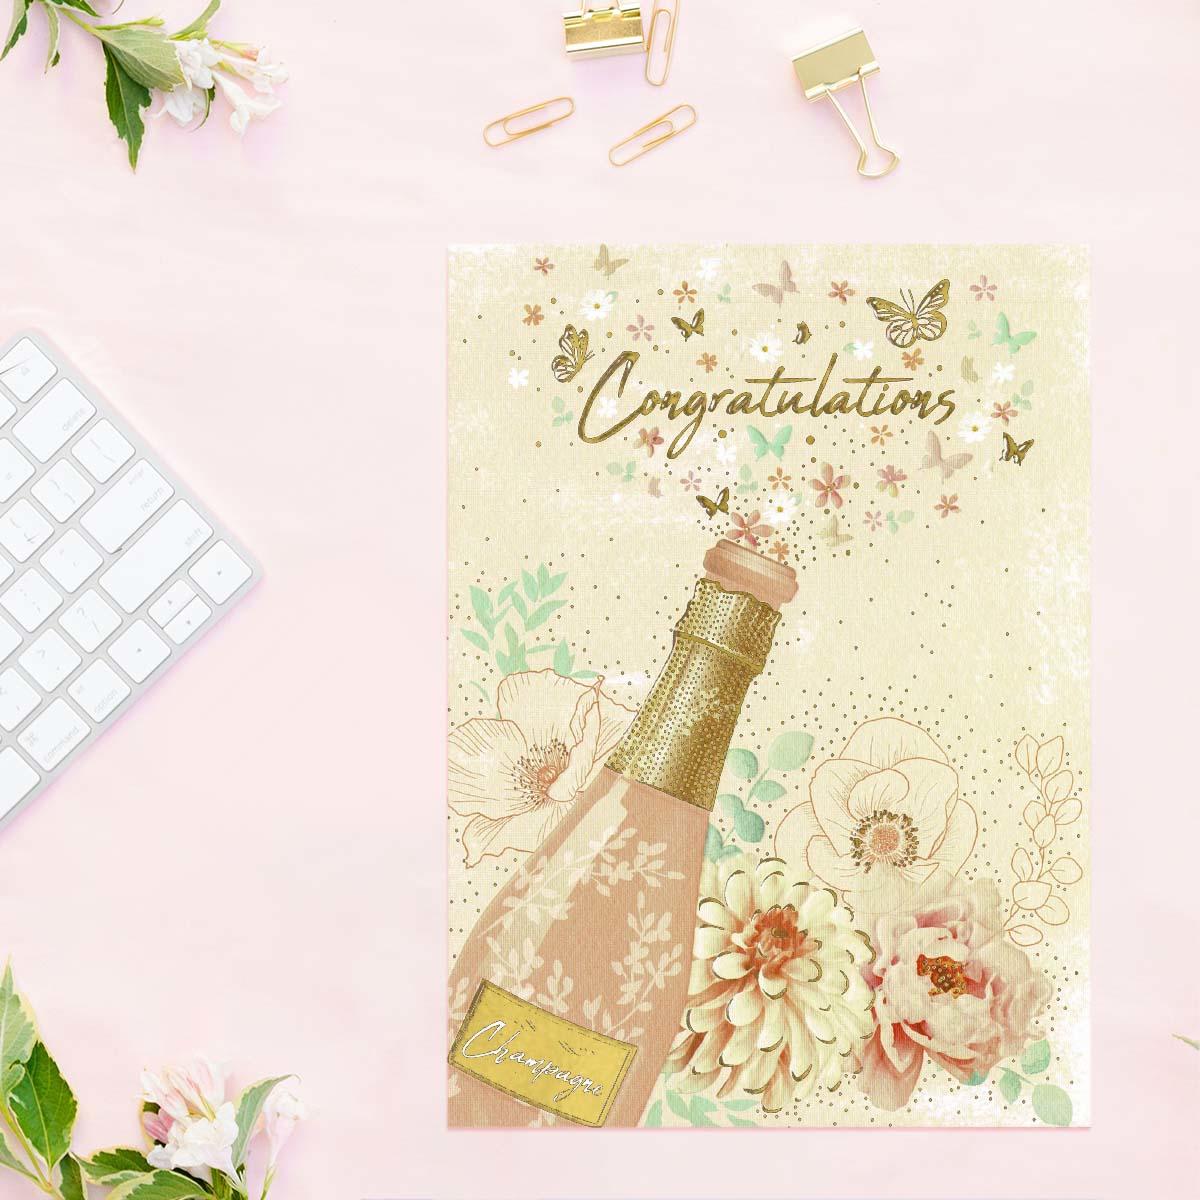 Congratulations Champagne & Flowers Card front Image